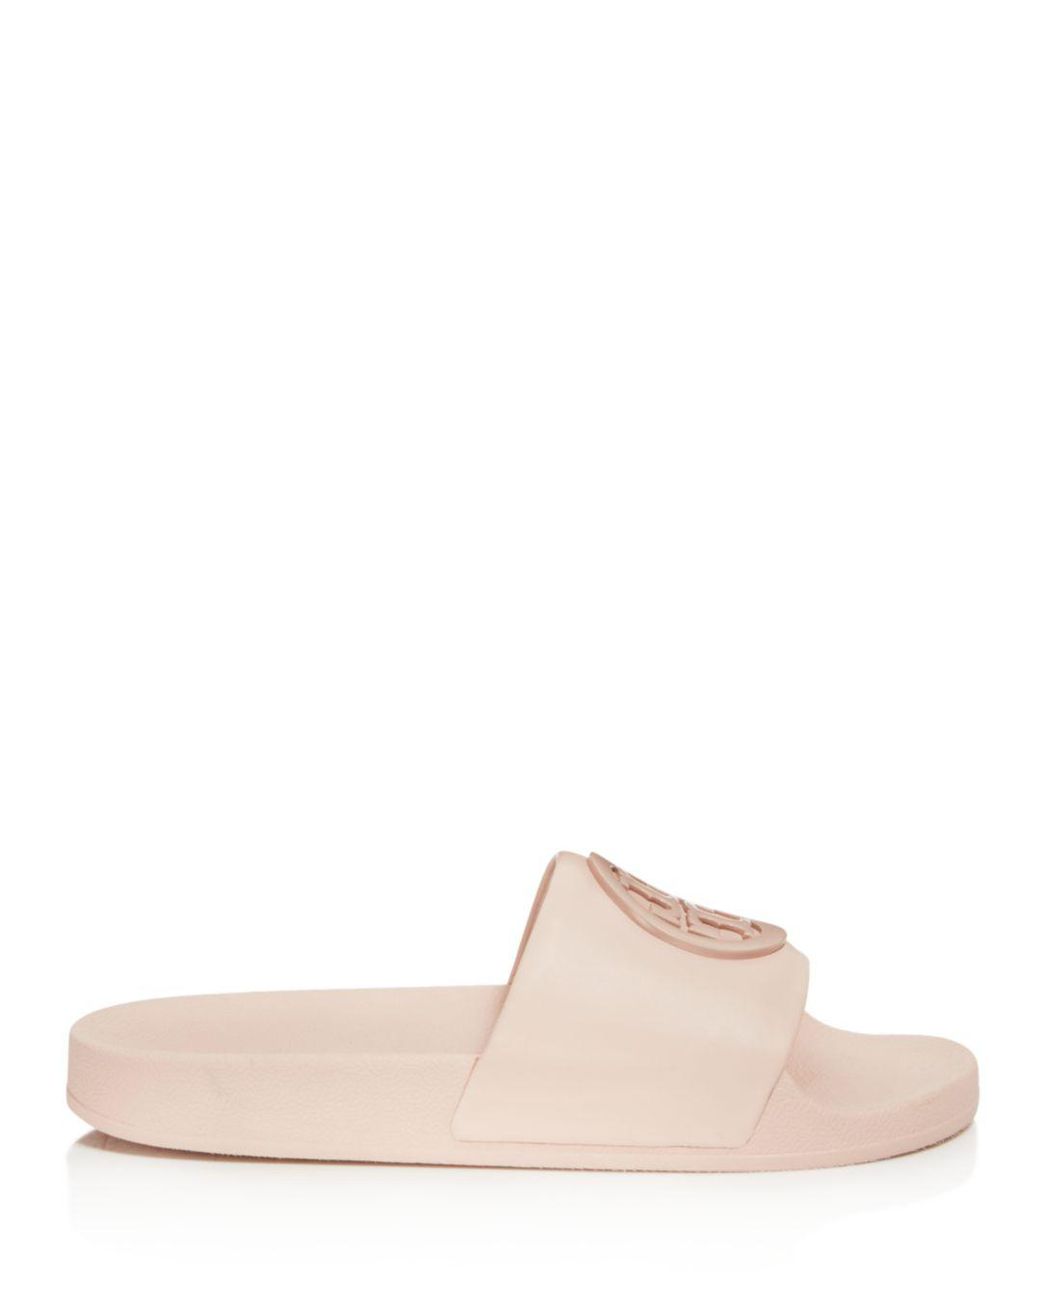 Tory Burch Women's Lina Leather Pool Slide Sandals | Lyst